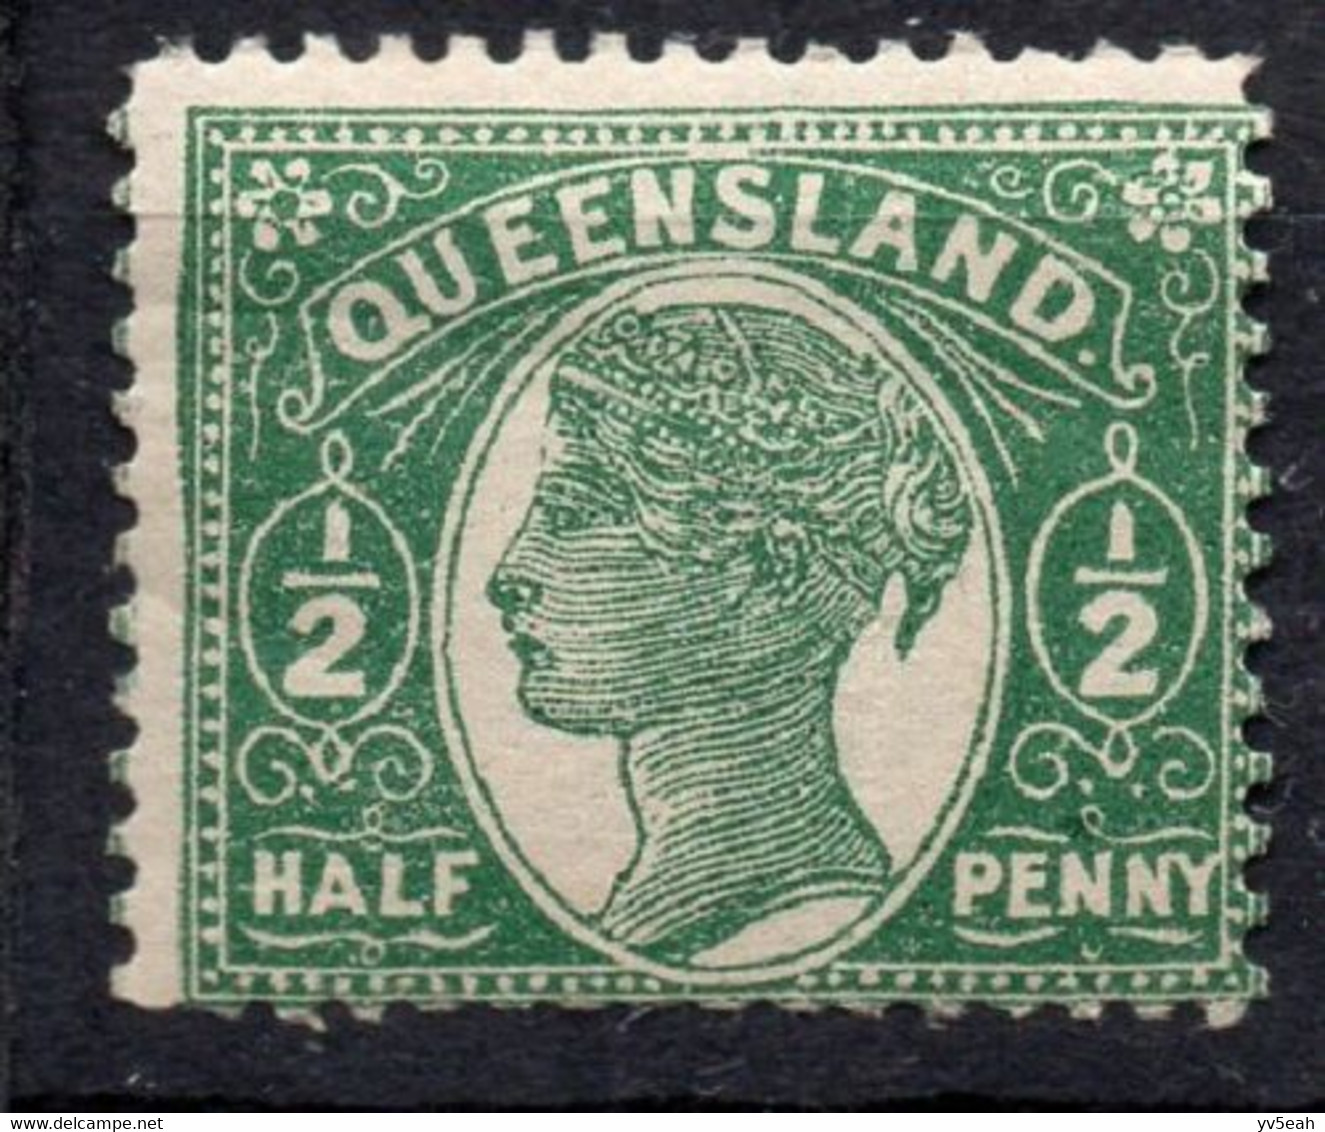 QUEENSLAND_AUSTRALIA/1895/MNH/SC#101/QUEEN VICTORIA / QV / 1/2p GREEN W/ MOIRE IN THE BACK - Mint Stamps